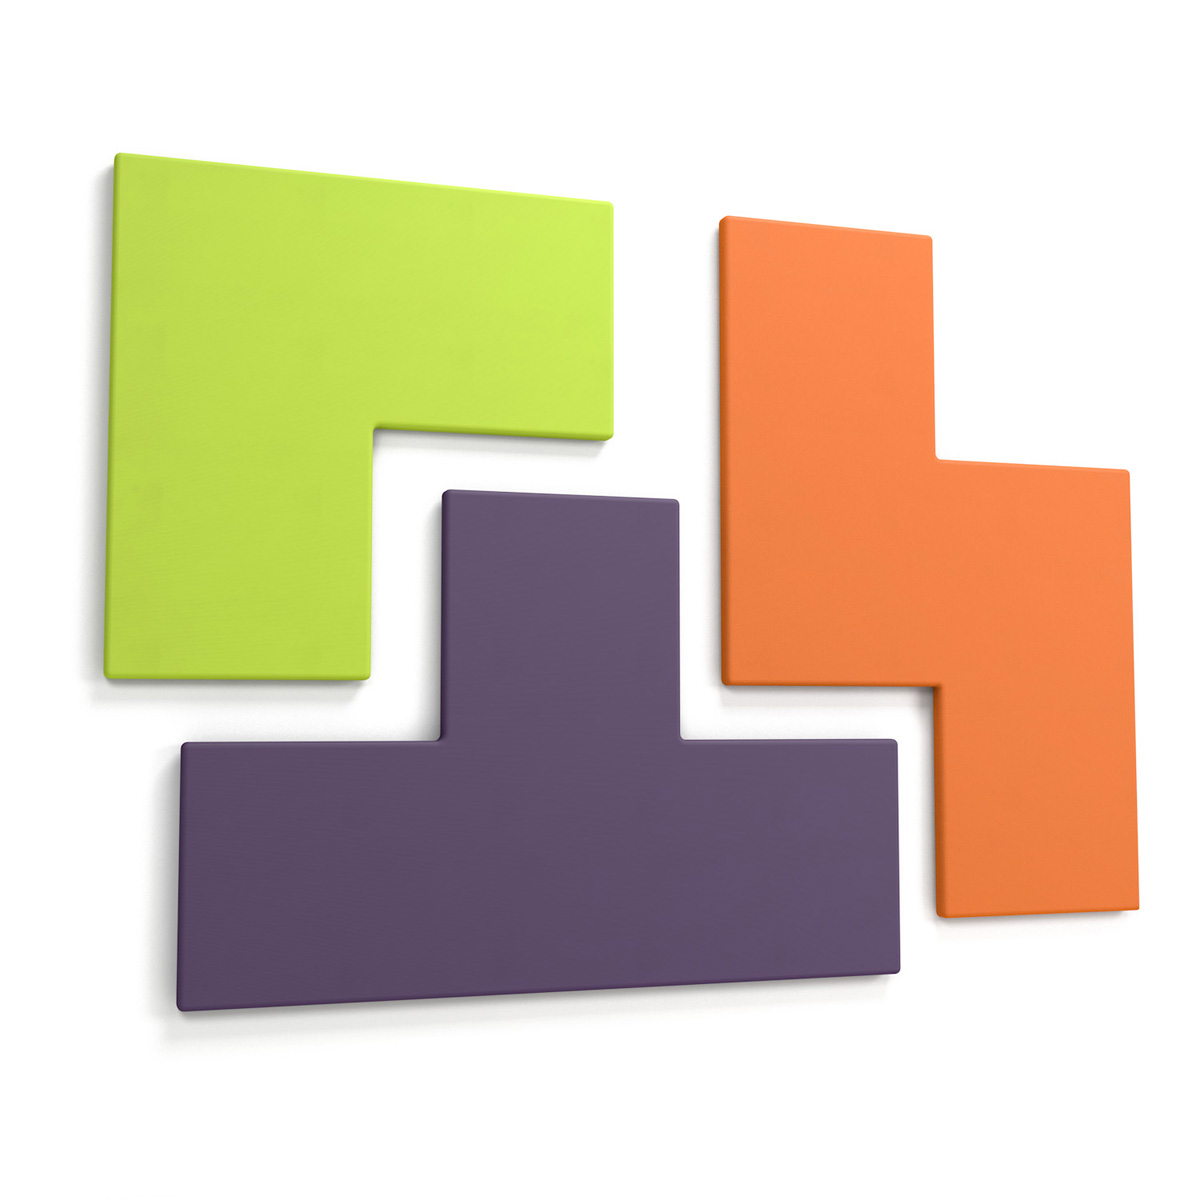 TETRATAK™ Interlocking Acoustic Wall Panels Are Available in Three Tetris Inspired Shapes